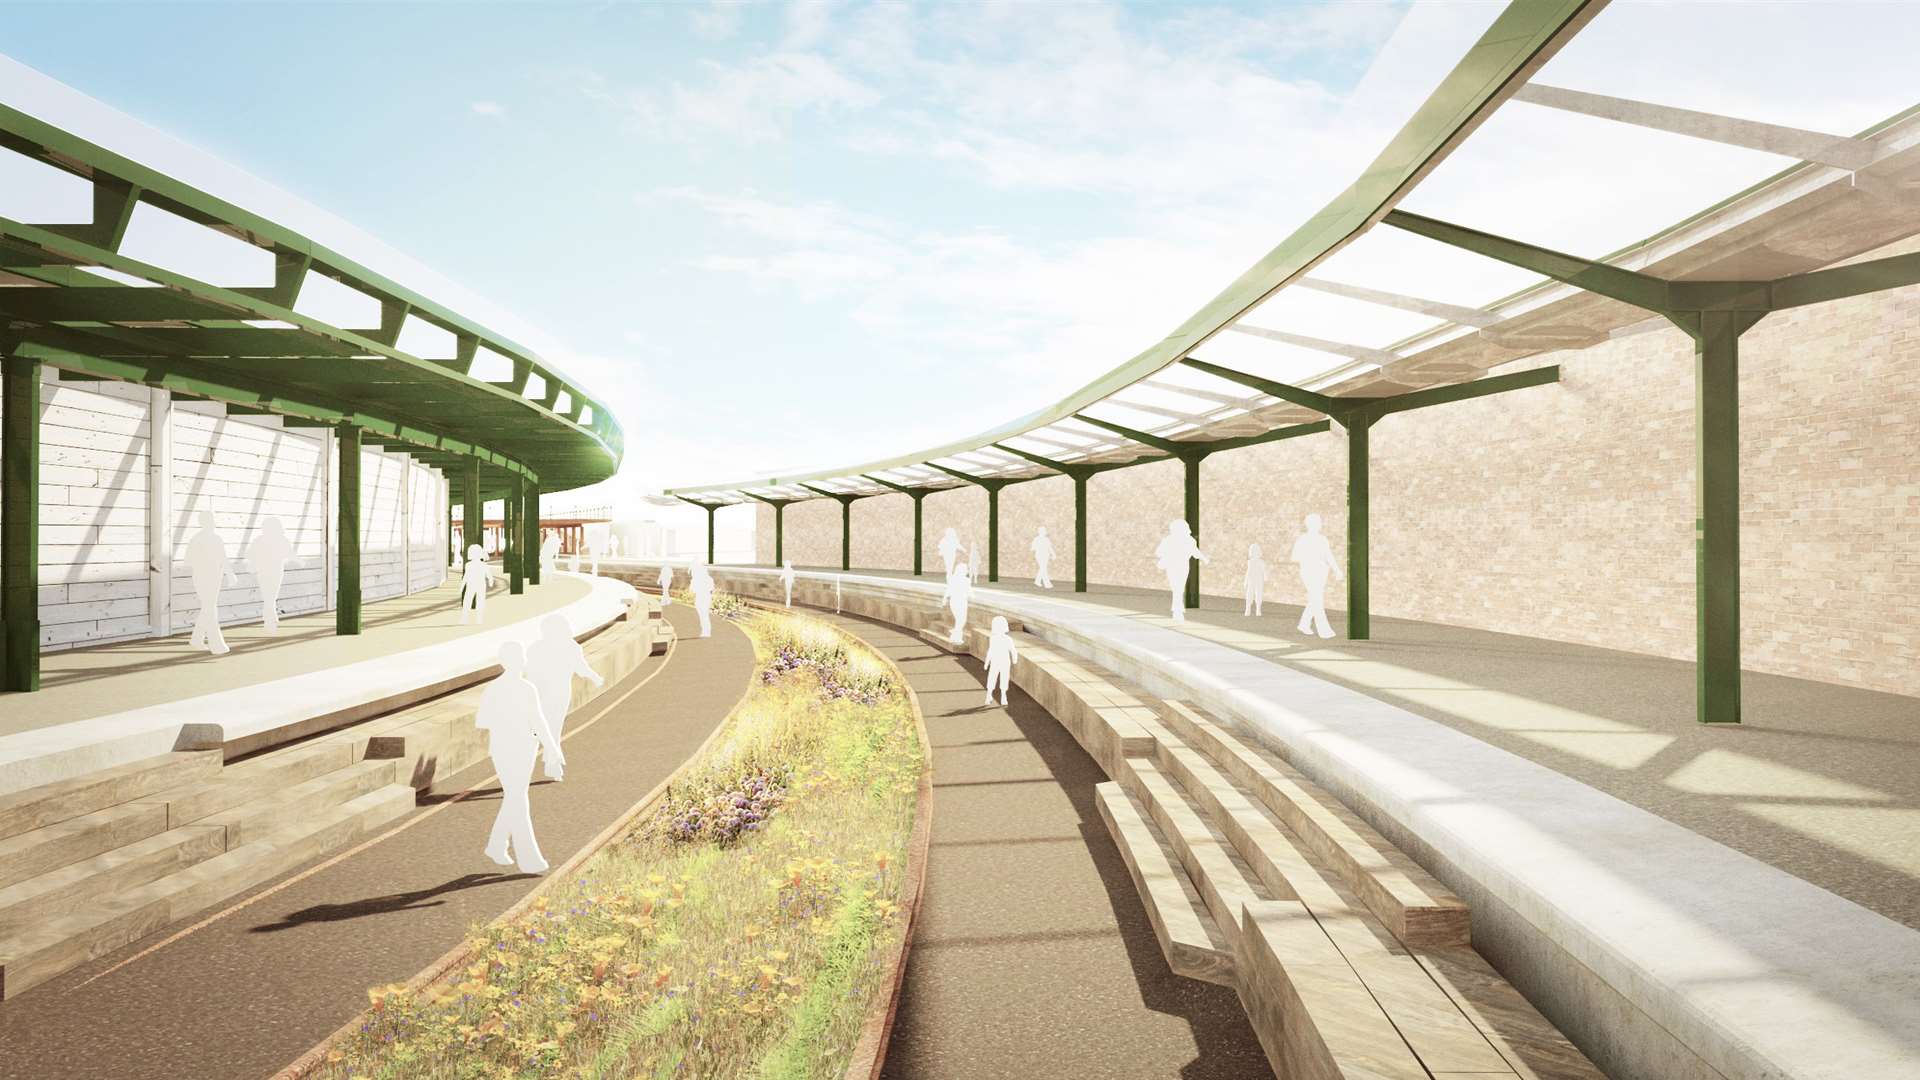 New plans revealed for the restoration of the old Folkestone Harbour Station. Picture: Folkestone Harbour Arm